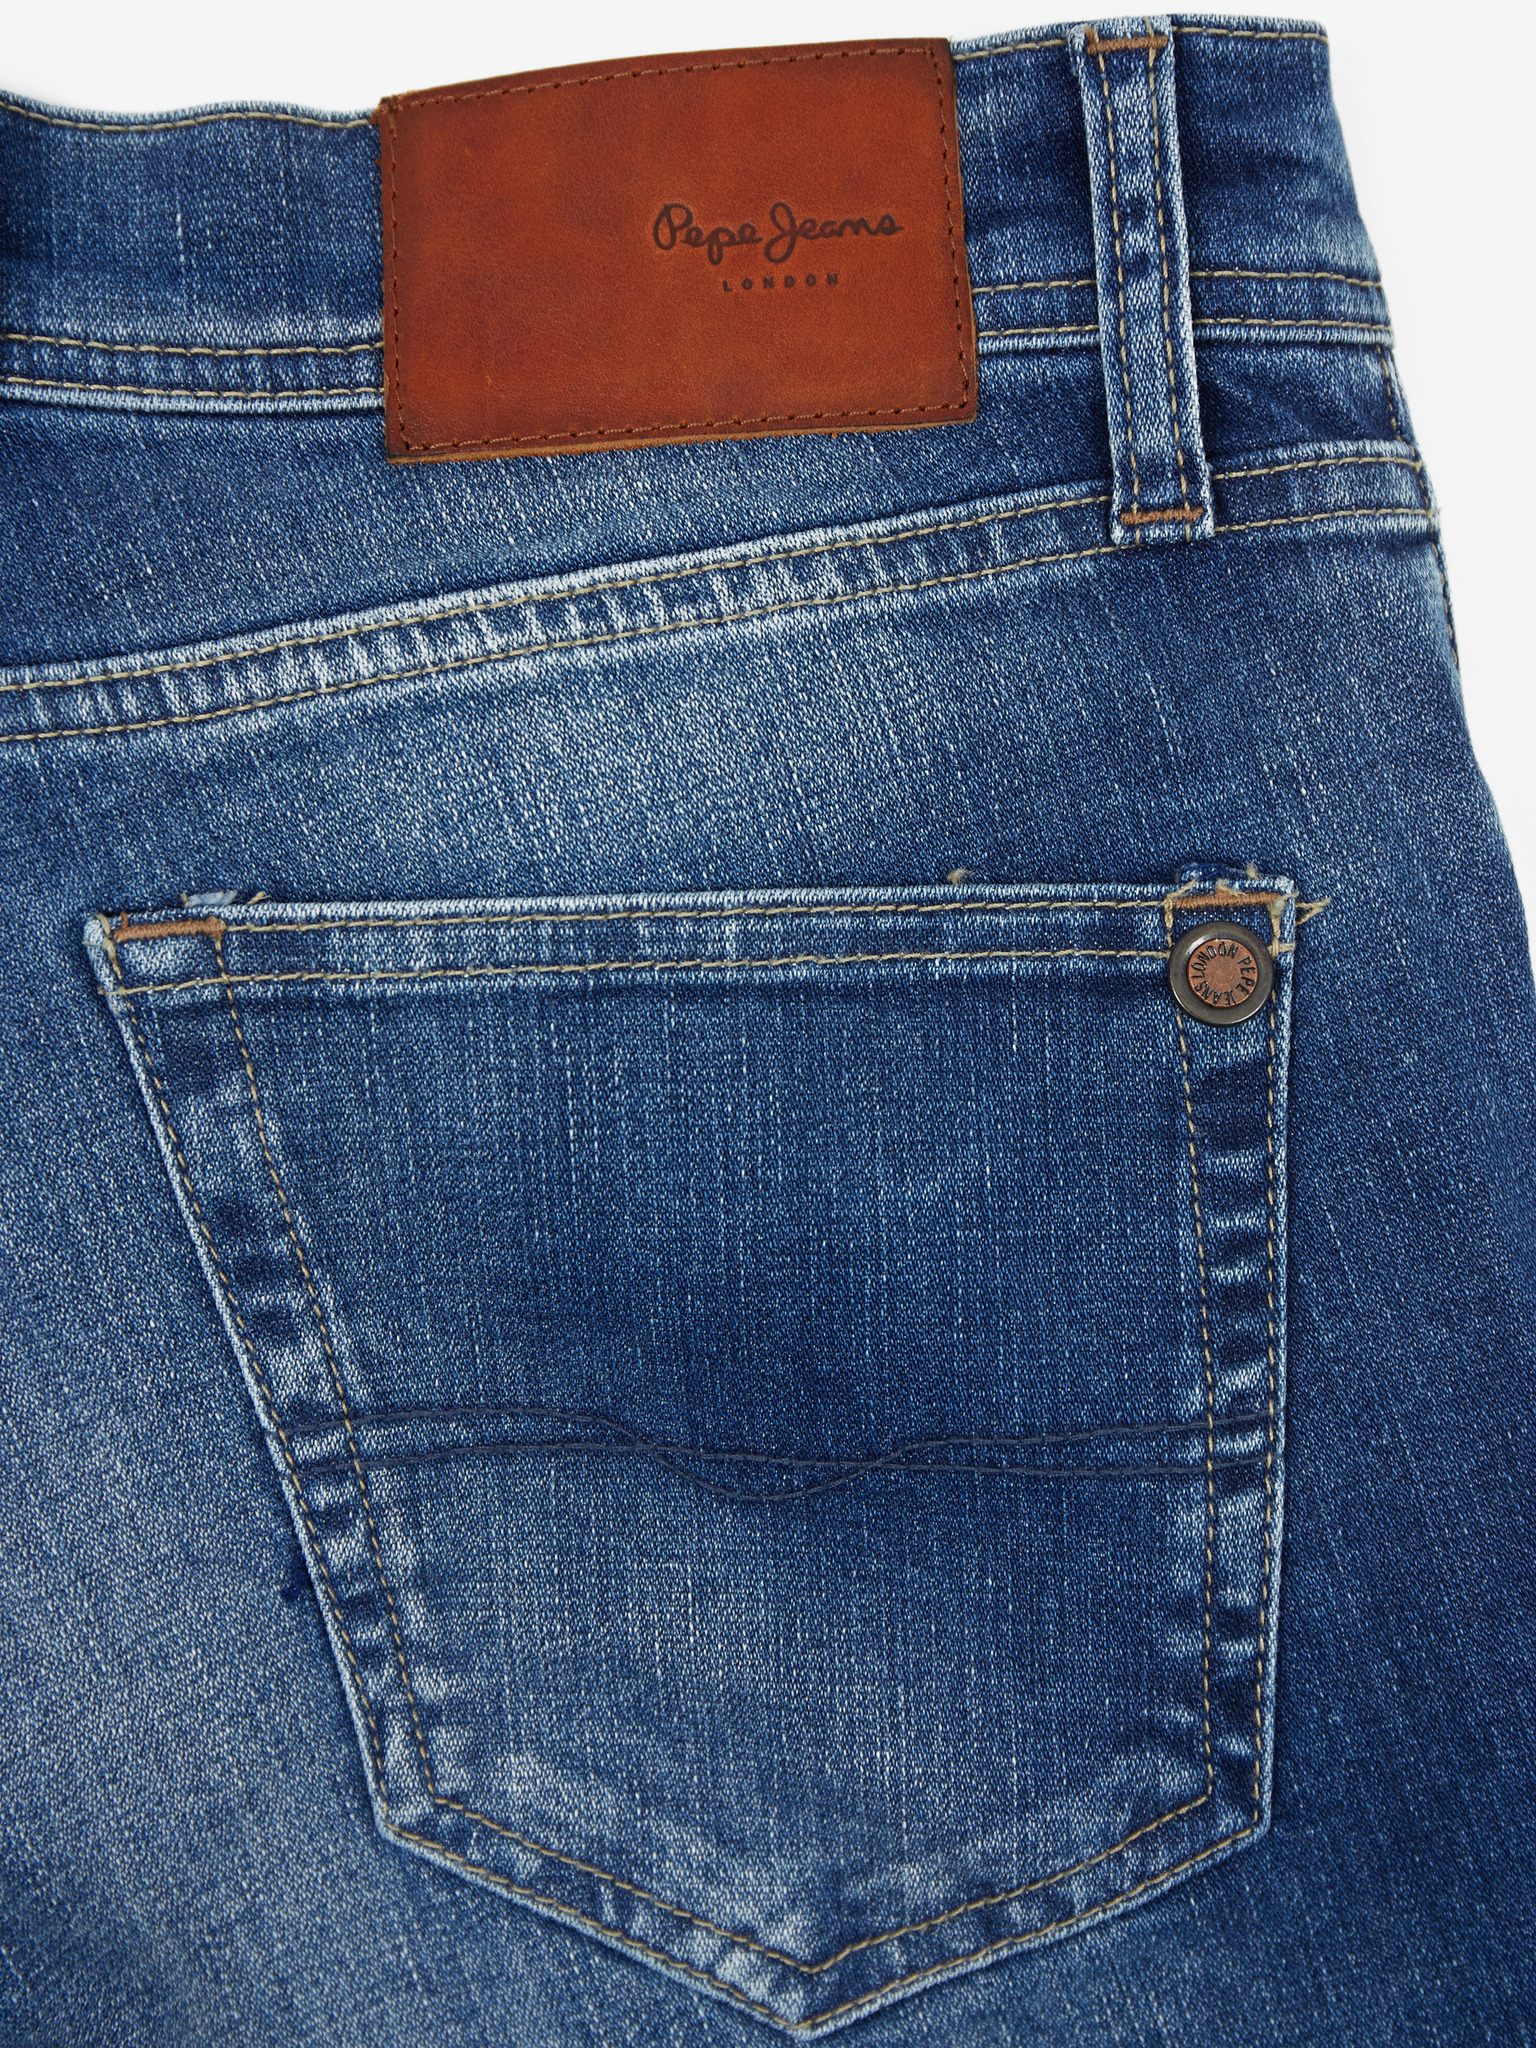 Pepe Jeans - Cane Jeans | Slim-Fit Jeans